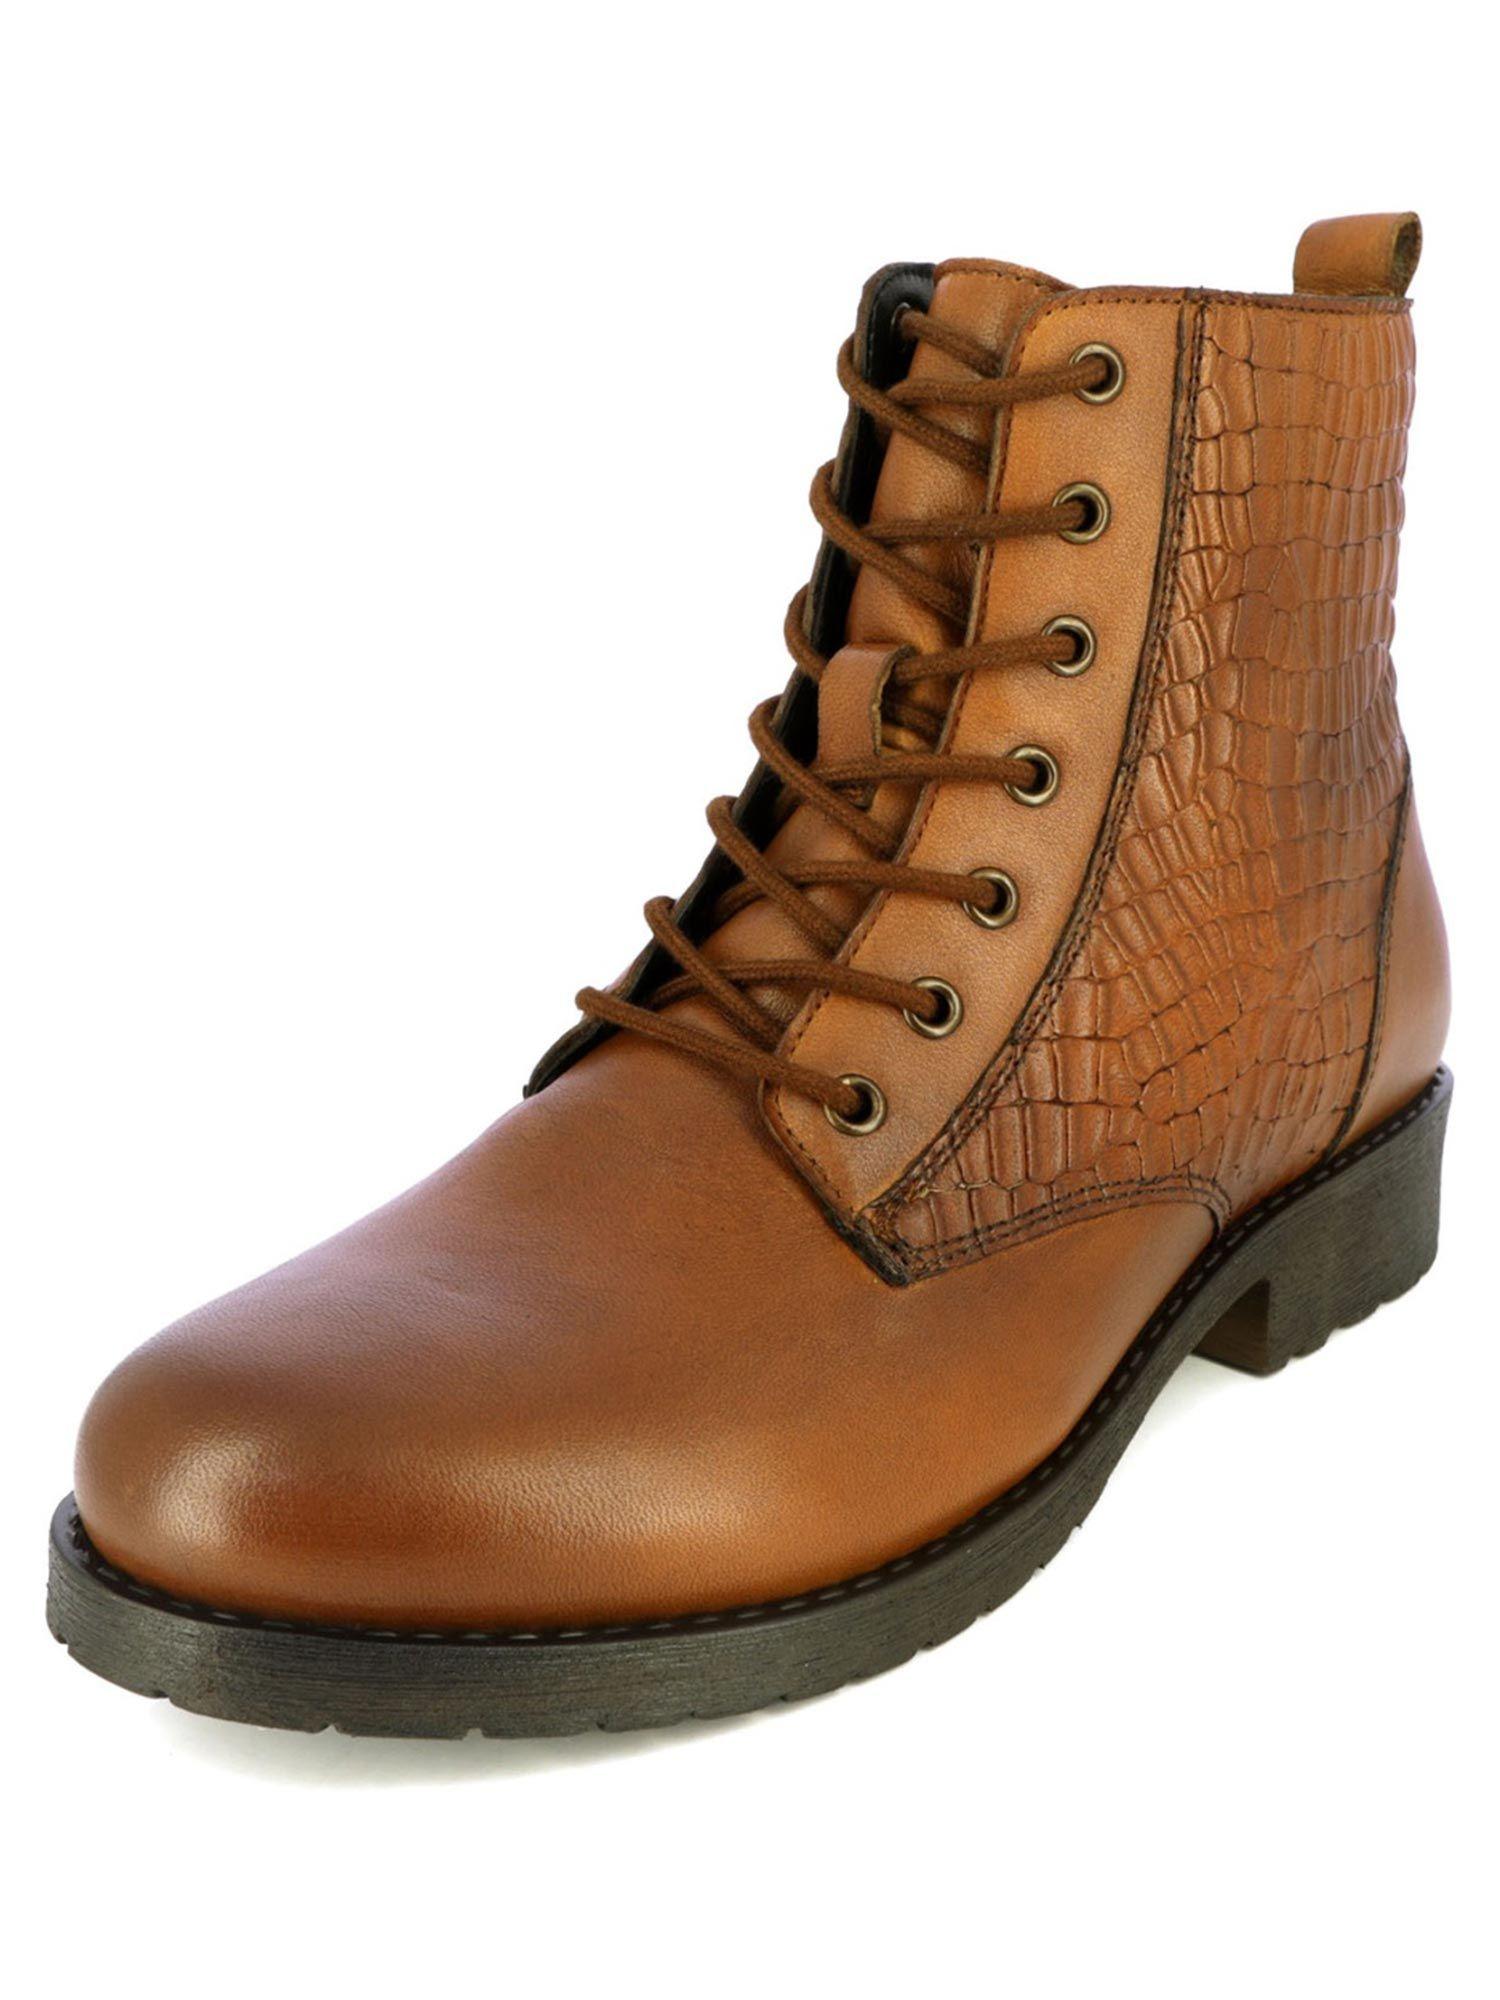 lace up ankle length tan boots